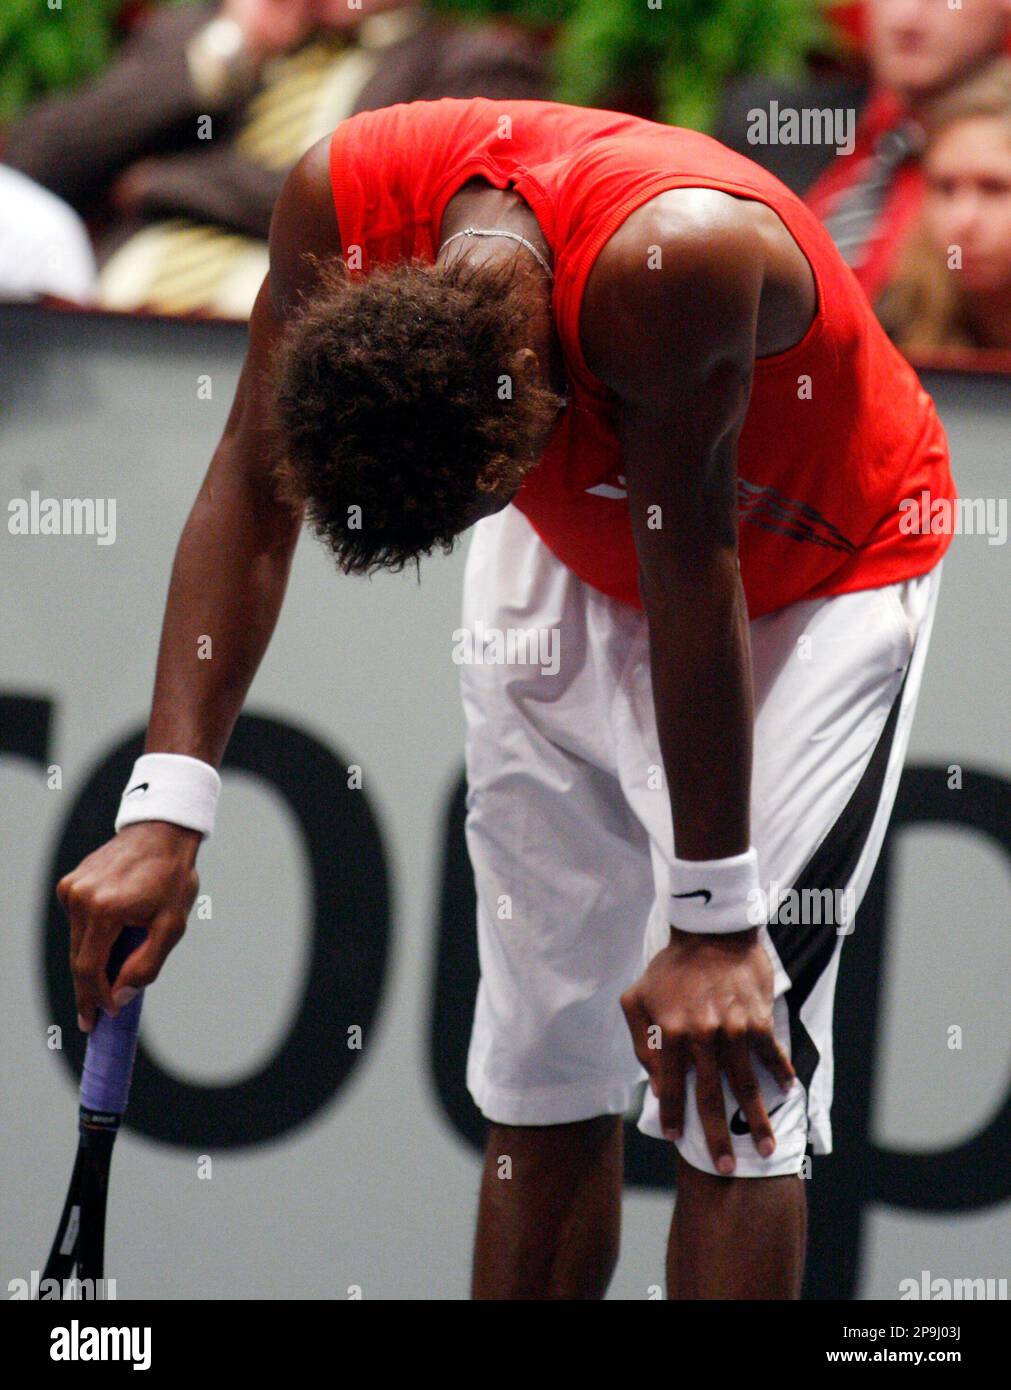 Gael Monfils from France reacts during the final match at the BA tennis trophy in Vienna, on Sunday, Oct. 12, 2008